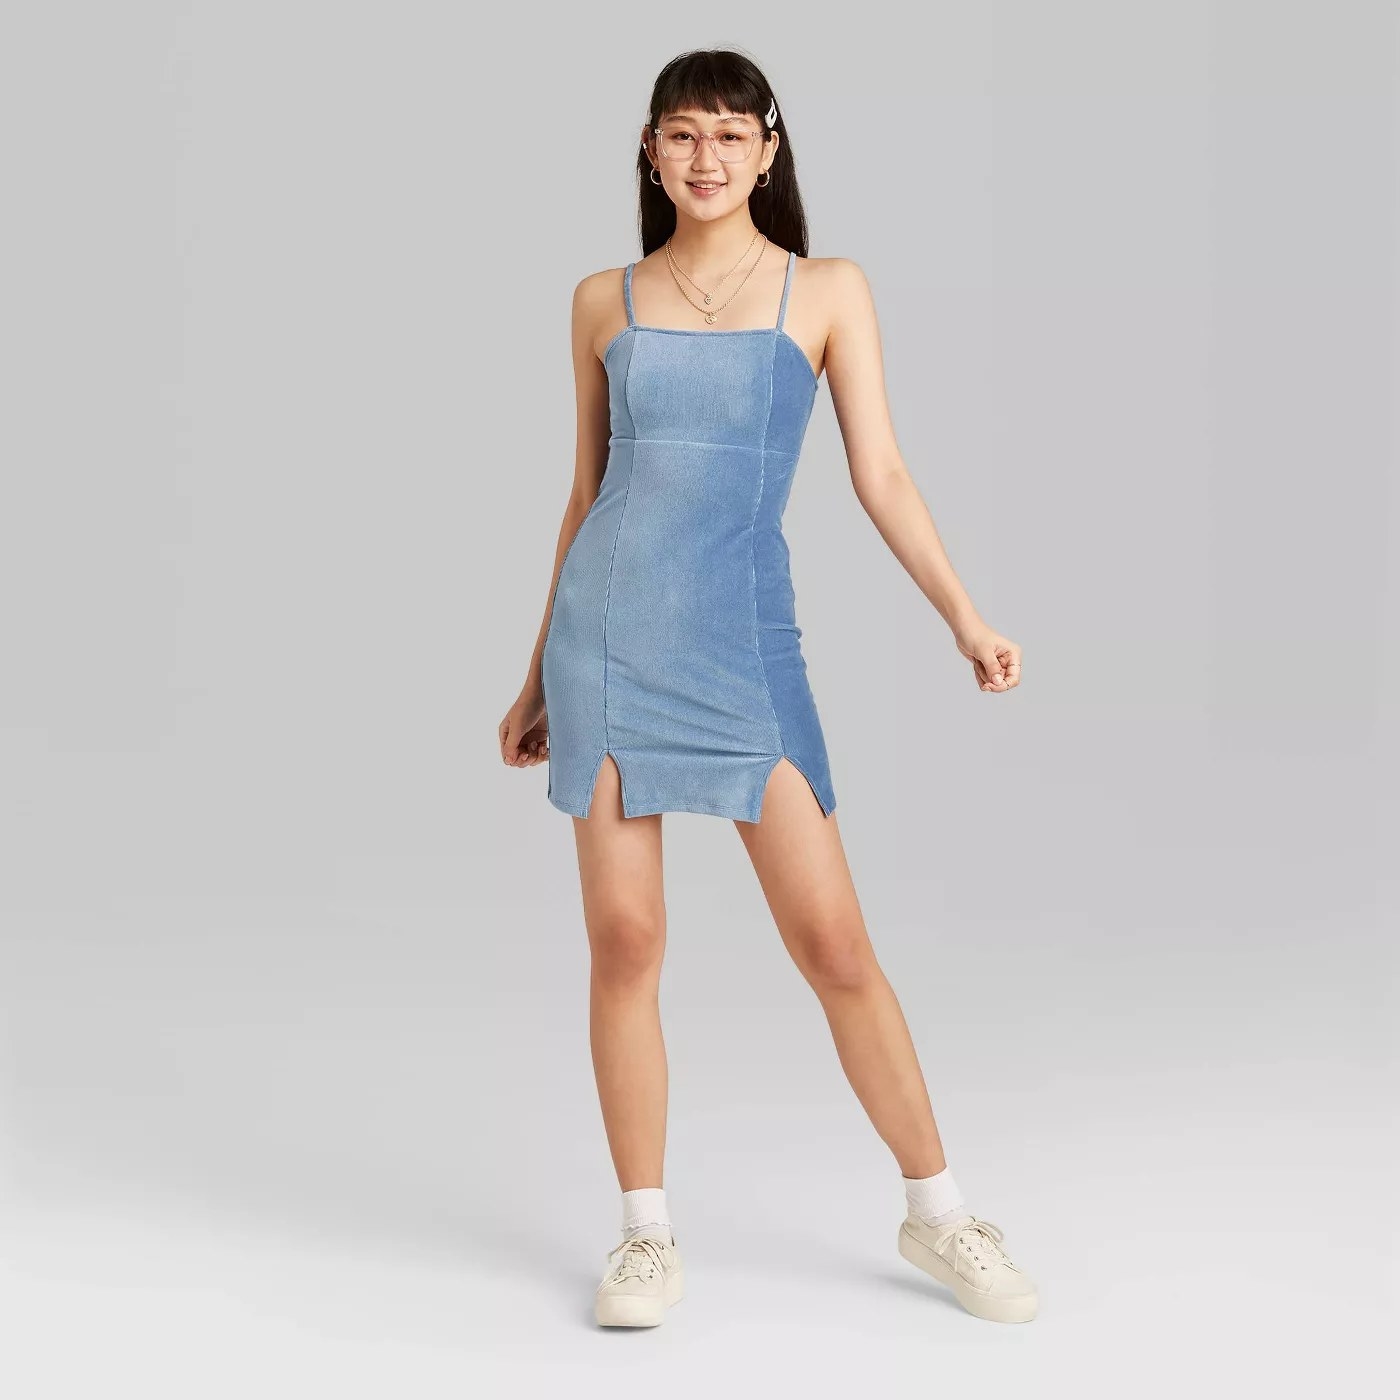 model wears light blue body con dress with two mini slips in the front 